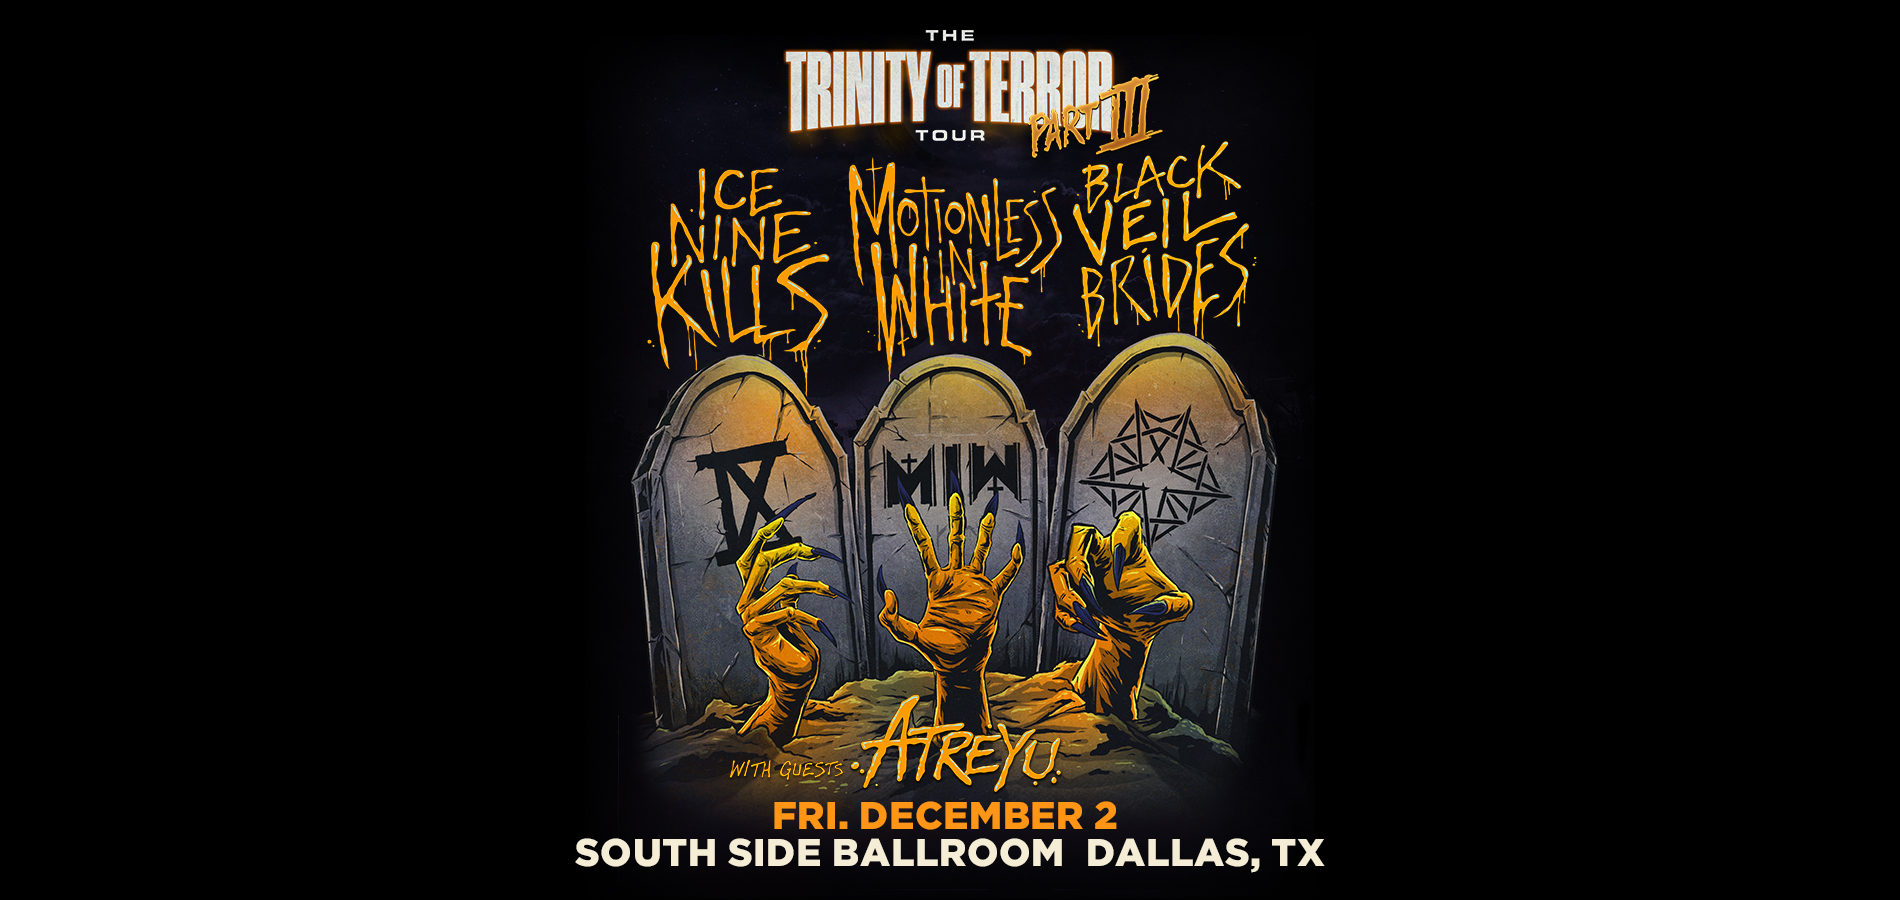 Trinity of Terror Tour featuring Ice Nine Kills, Motionless In White, and Black Veil Brides